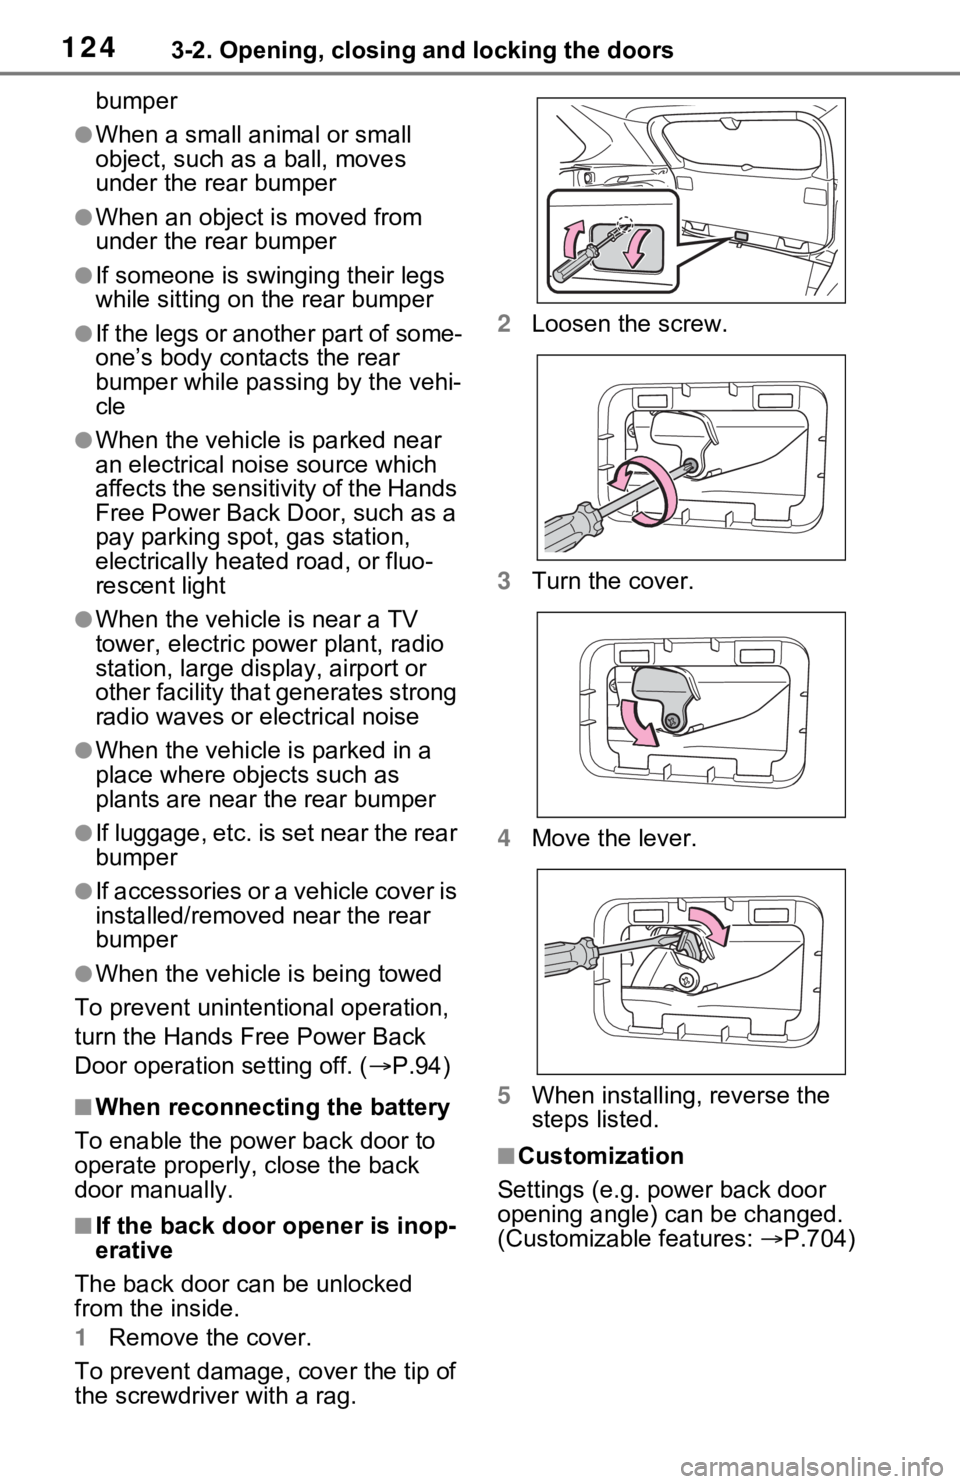 TOYOTA RAV4 2021  Owners Manual (in English) 1243-2. Opening, closing and locking the doors
bumper
●When a small animal or small 
object, such as a ball, moves 
under the rear bumper
●When an object is moved from 
under the rear bumper
●If